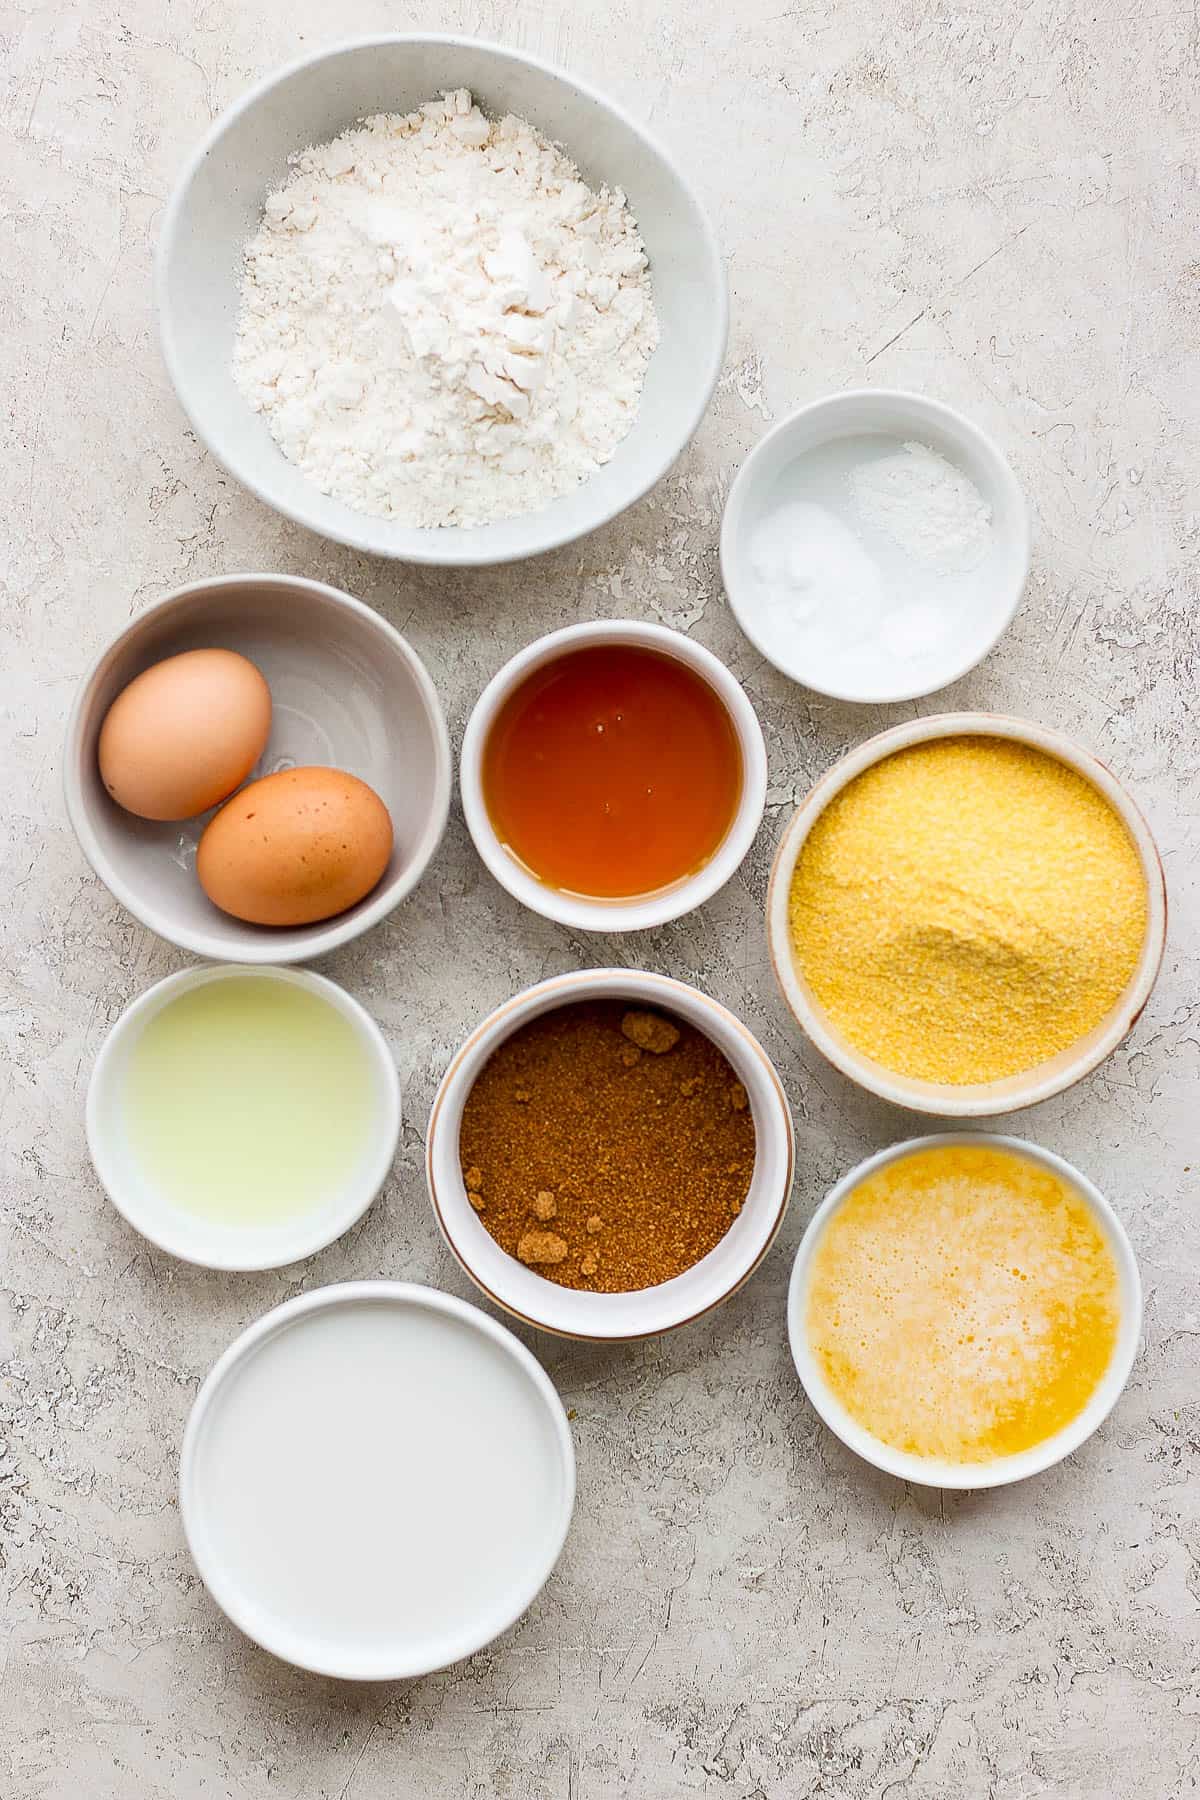 The ingredients for cornbread muffins in separate bowls.